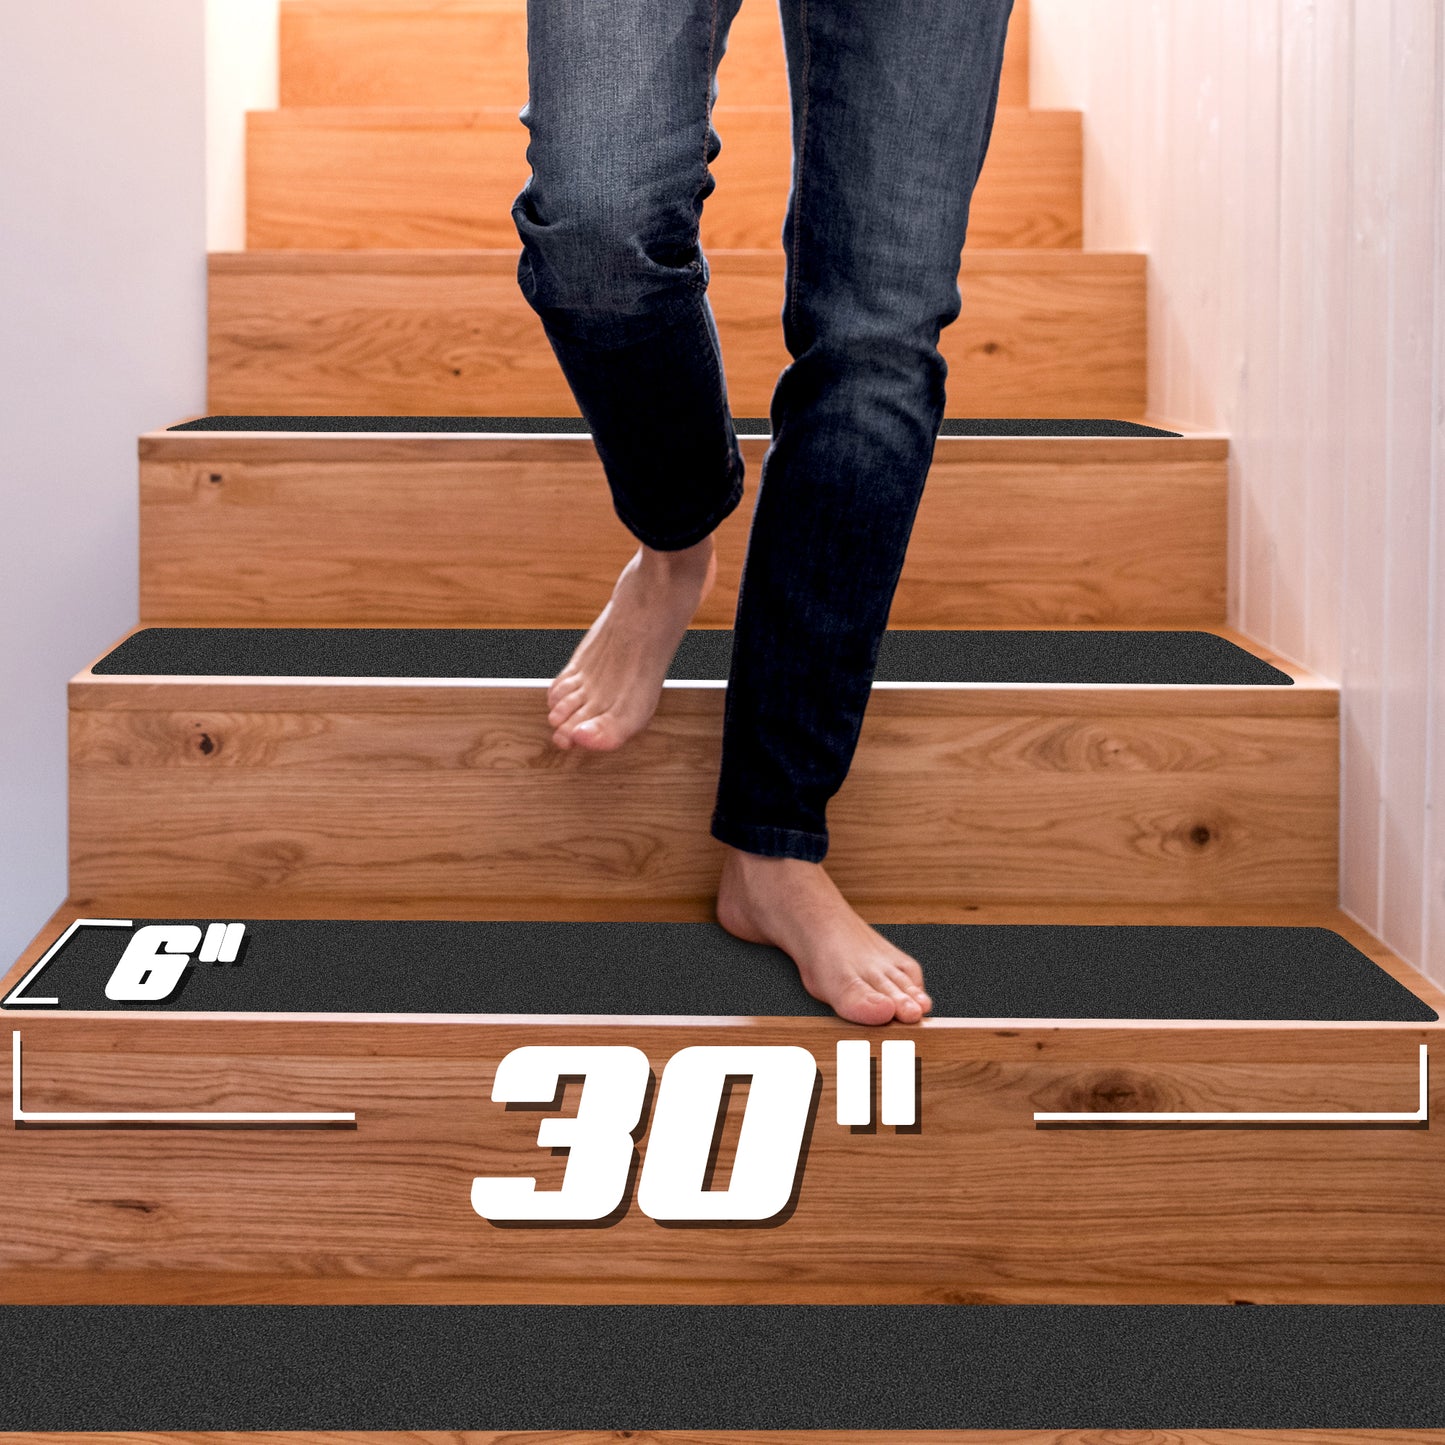 Pre Cut Stair Treads Non Slip Outdoor Tape Black Ideal for Garage Porch Indoor & Outdoor with Roller